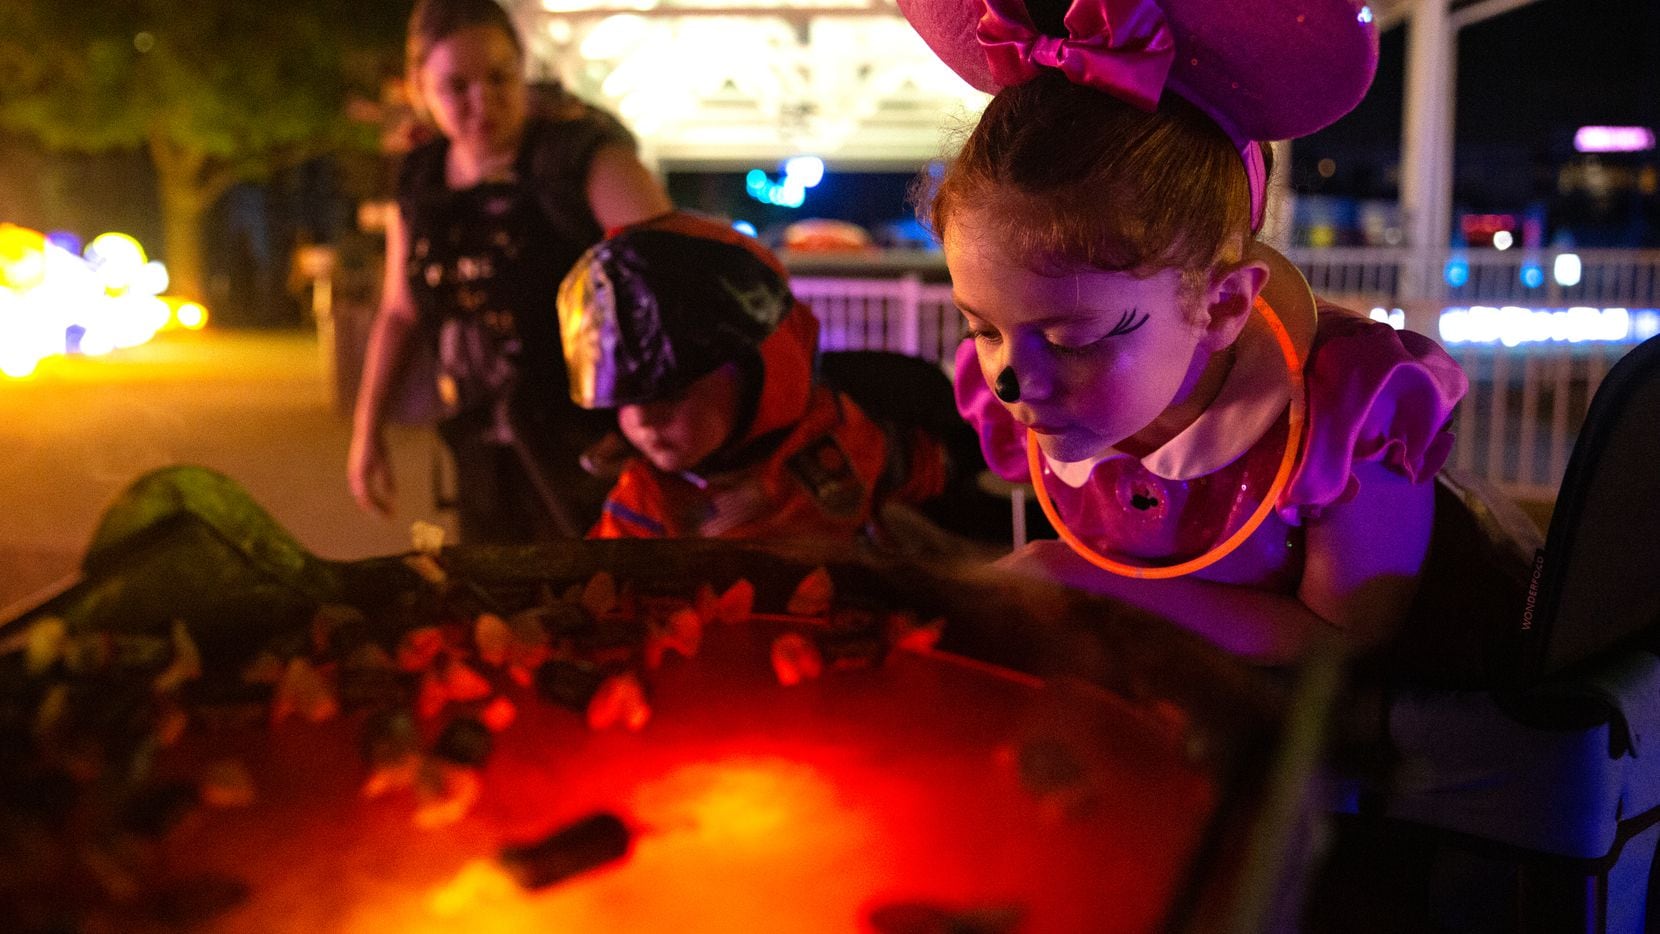 Aurora Deringer, 6, checks out the candy possibilities at a trick-or-treat station at Frights’n Lights at Riders Field in Frisco, TX on October 24, 2021. Frights’n Lights has the longest trick-or-treat trail in Texas. Another Frisco event(Shelby Tauber/Special Contributor)